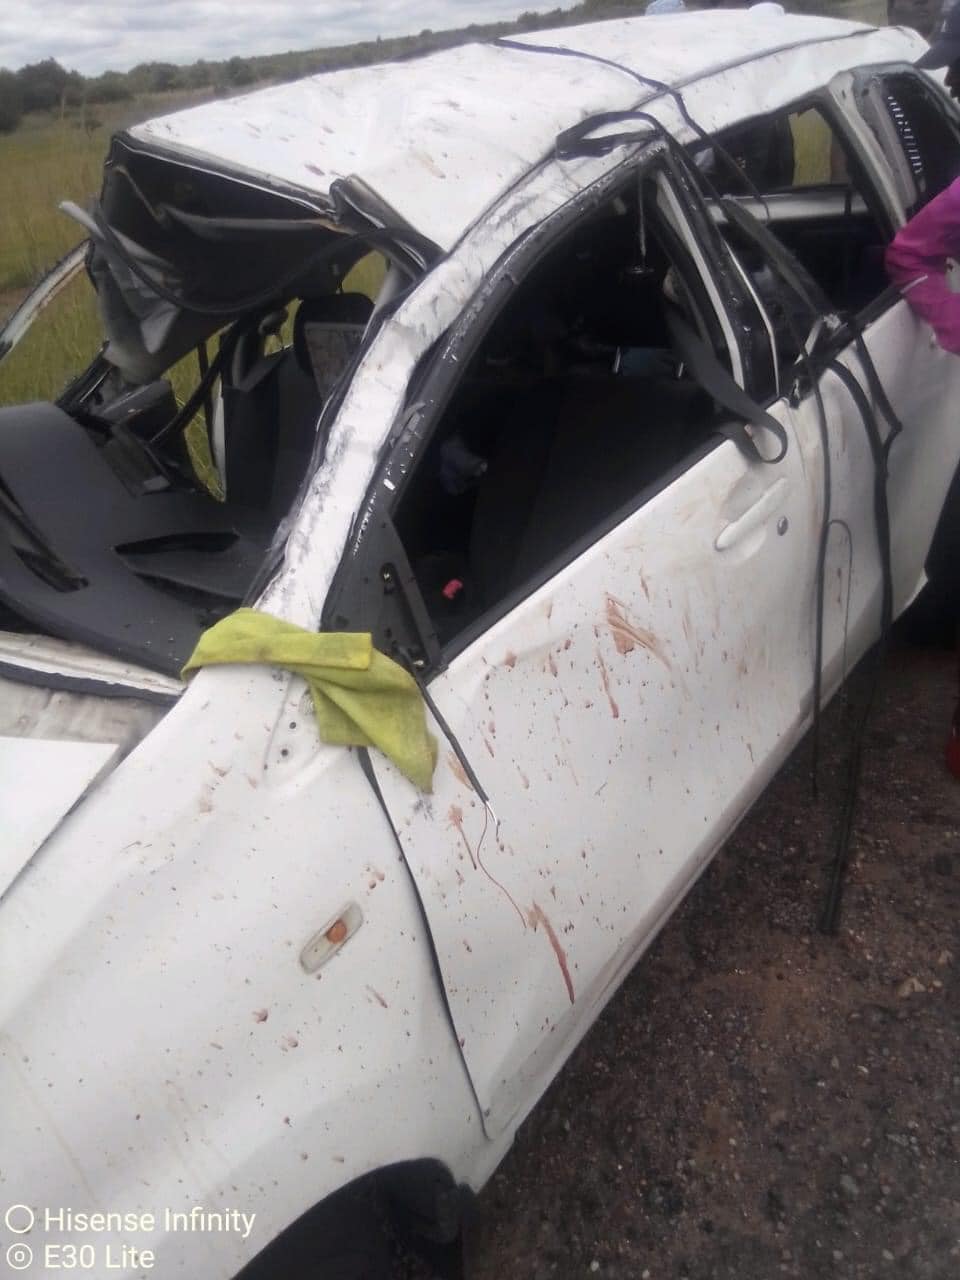 Newly-wed couple travelling from Zimbabwe killed in horror road accident at Kranskop in Limpopo South Africa